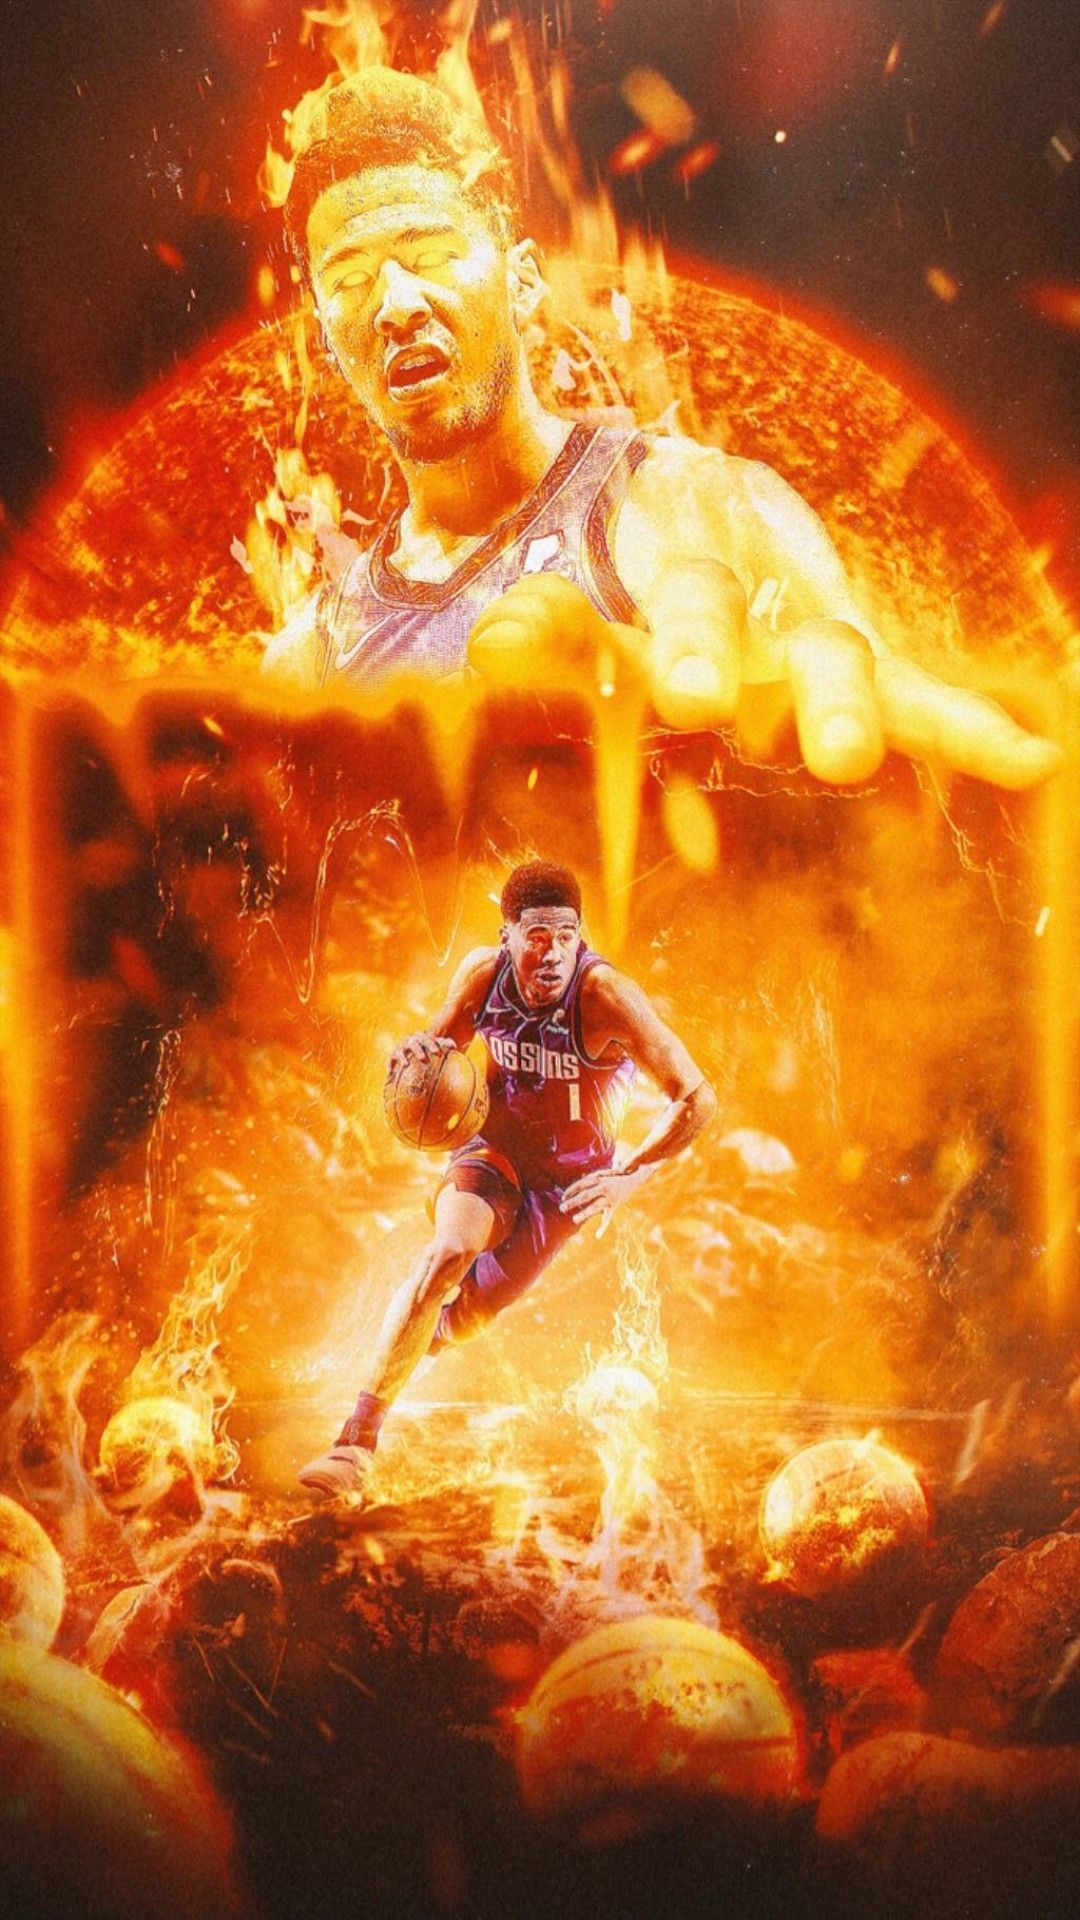 Best NBA Wallpapers 75 images